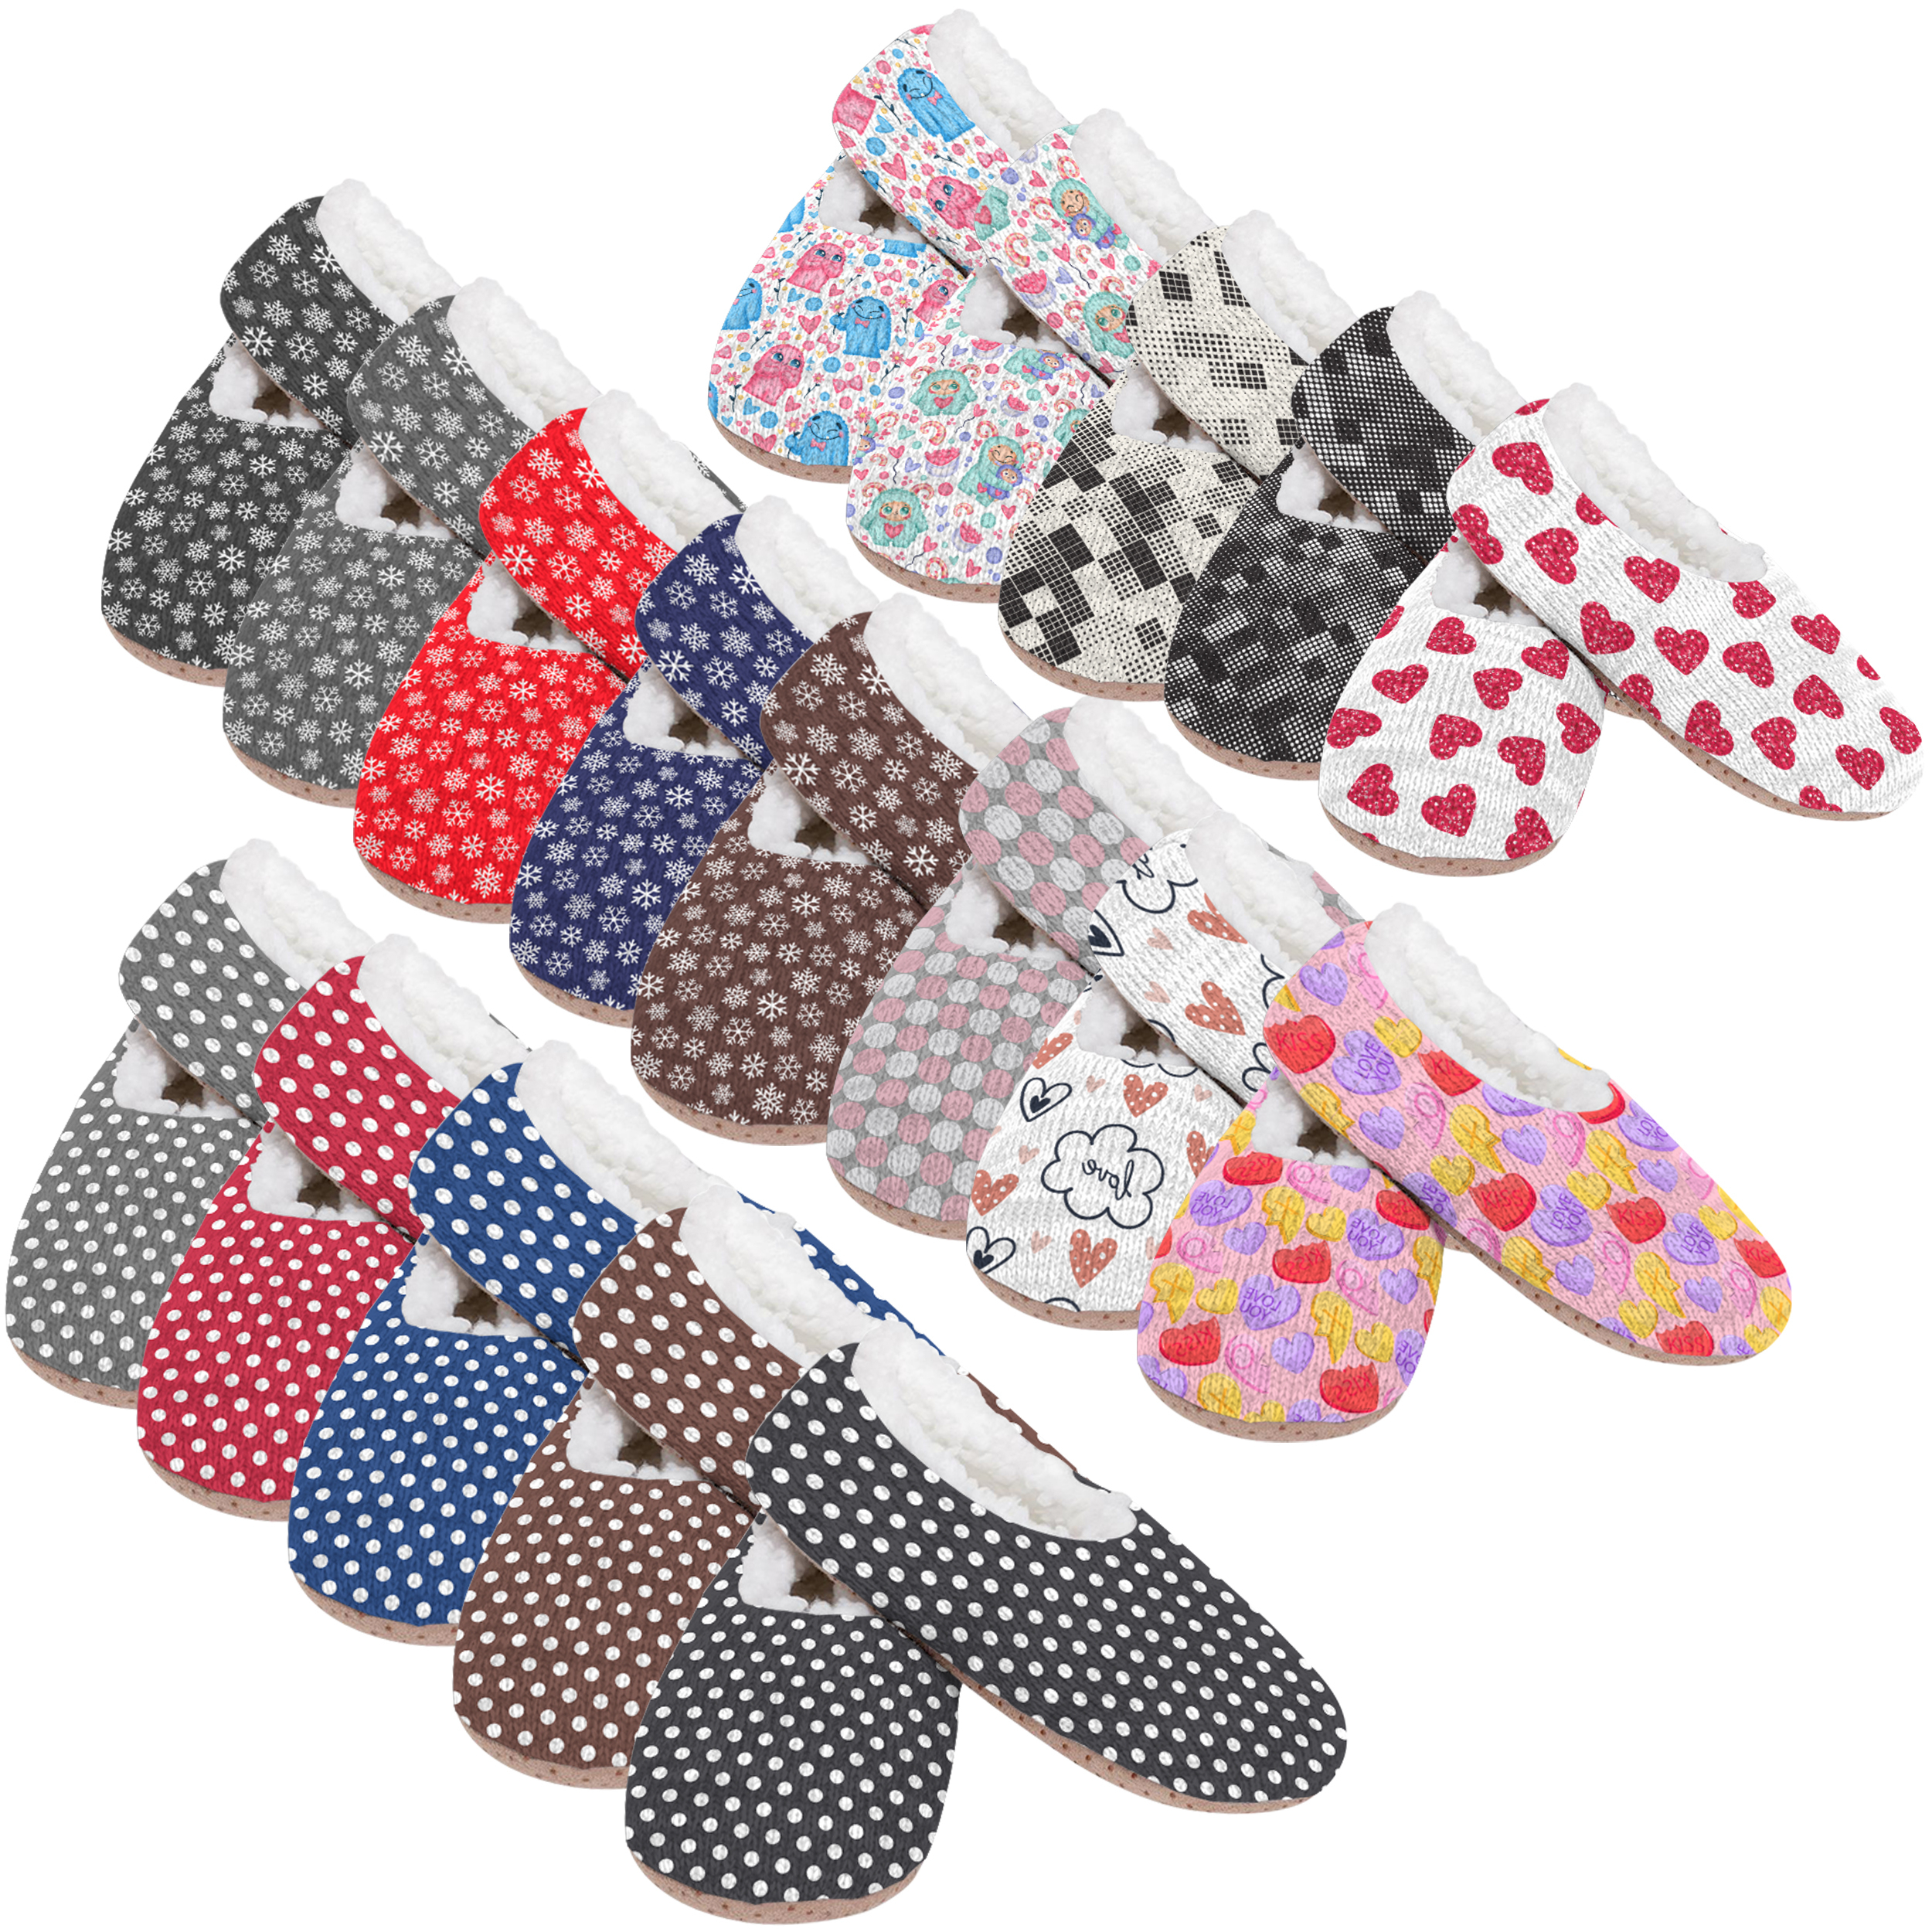 3-Pairs: Women's Cozy Sherpa-Lined Slipper Socks With Non-Skid Sole Grippers - Solid & Print